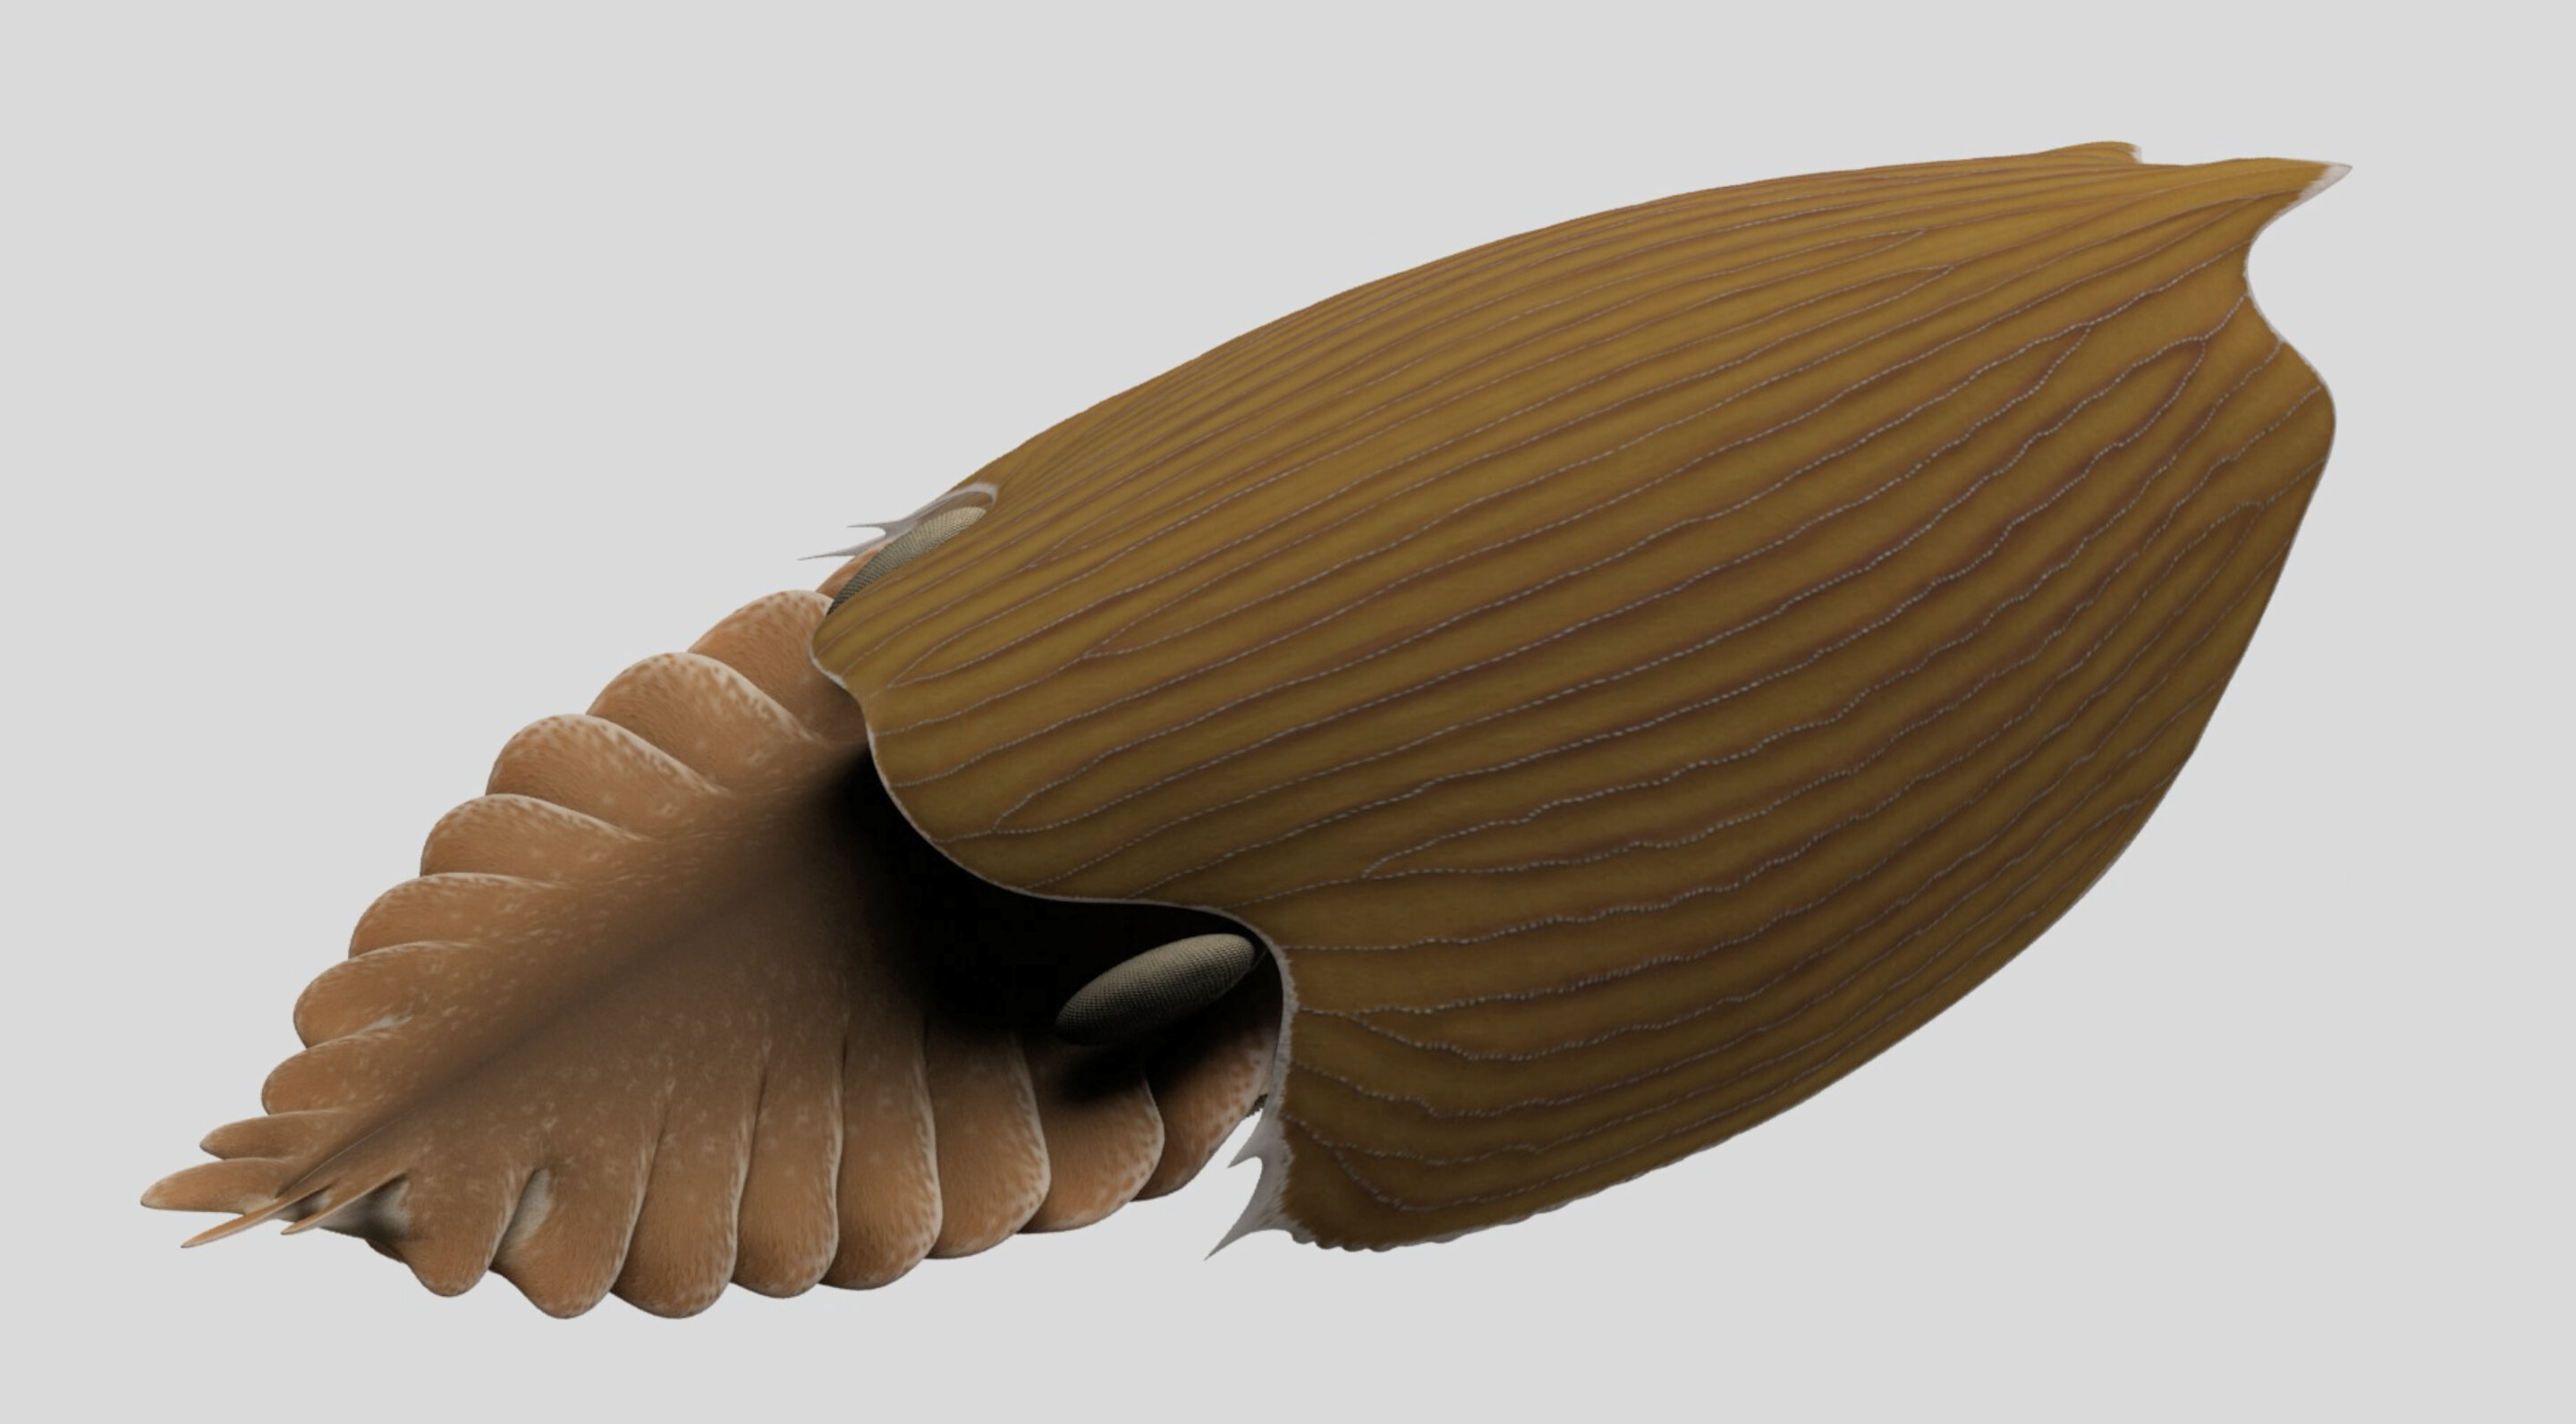 Massive new animal species discovered in half-billion-year-old Burgess Shale